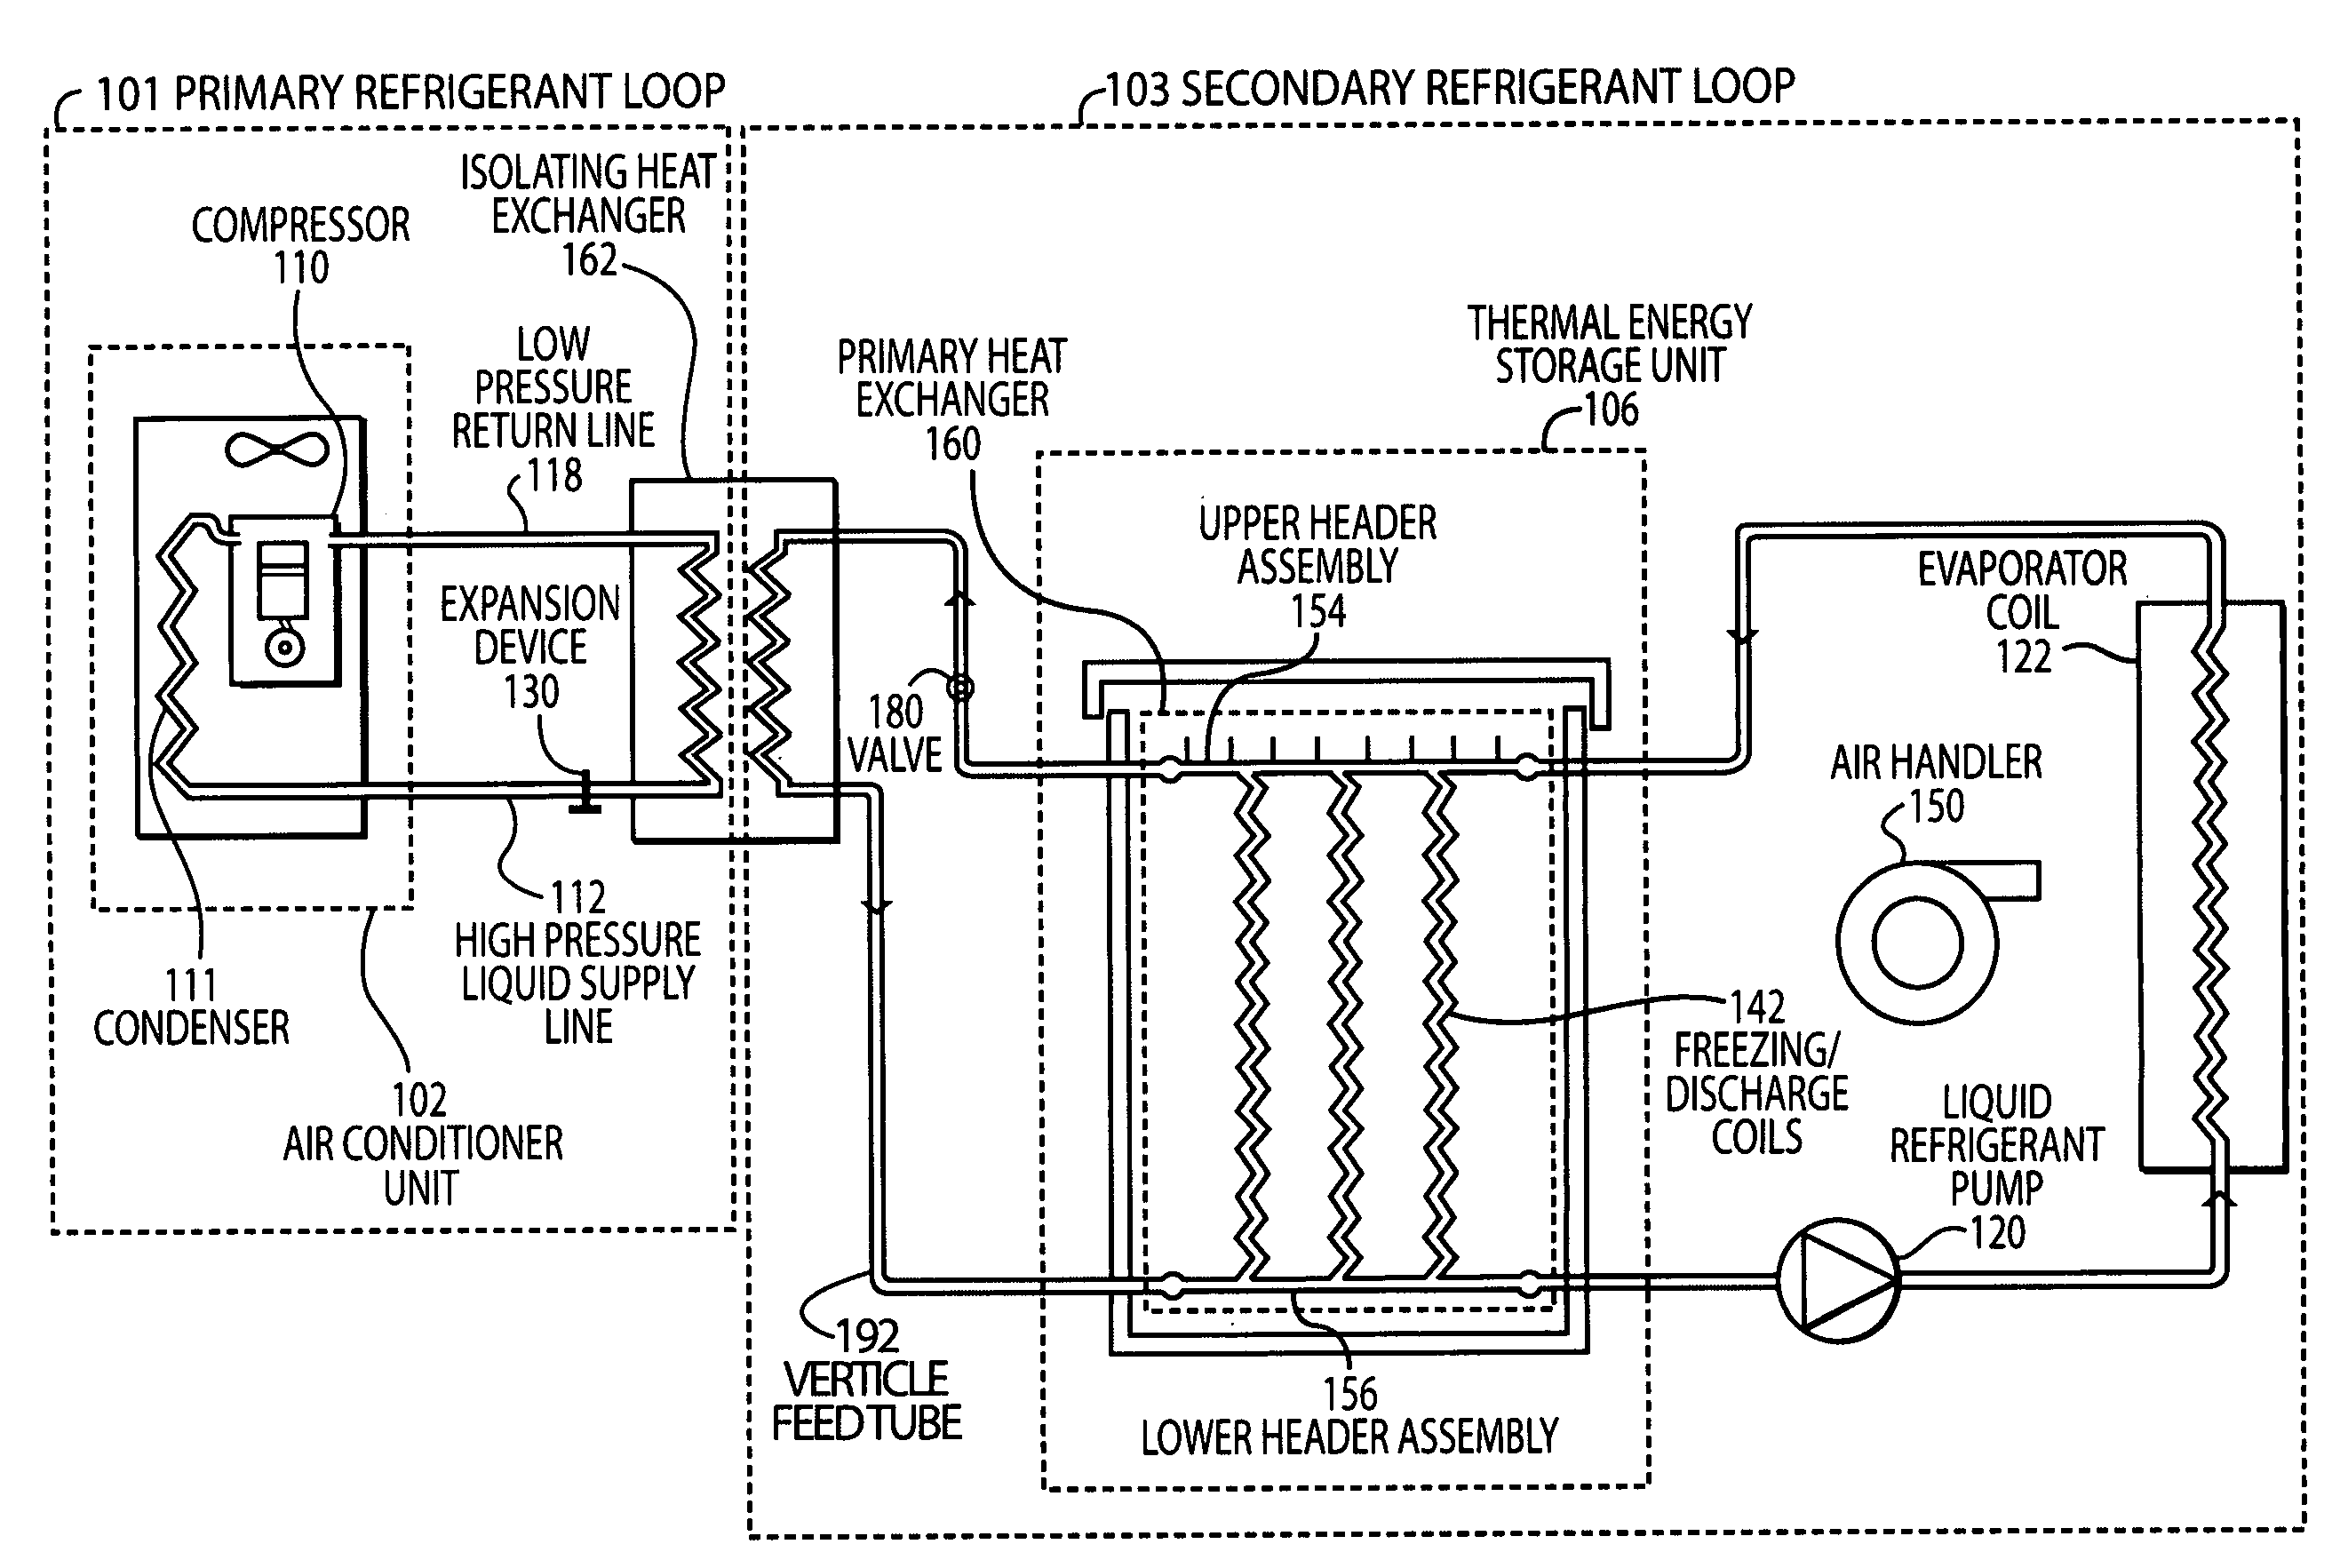 Thermal energy storage and cooling system with gravity fed secondary refrigerant isolation